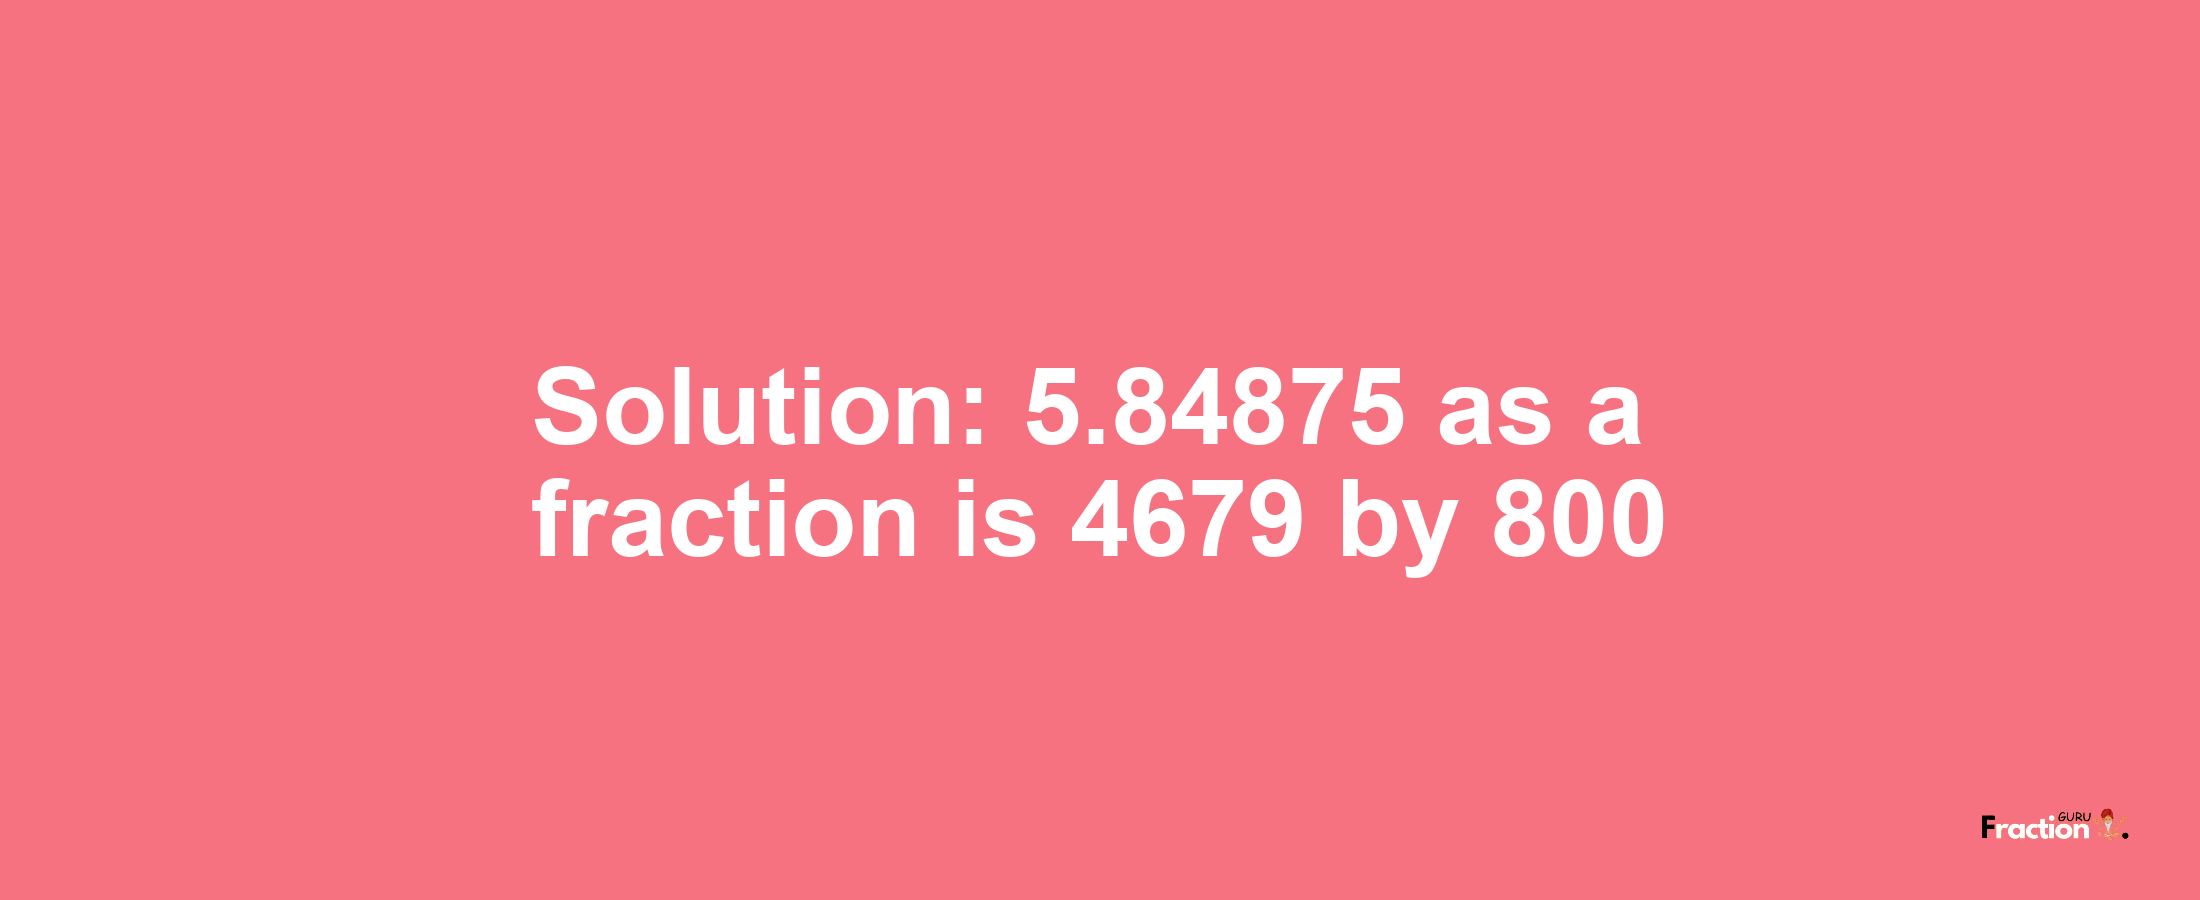 Solution:5.84875 as a fraction is 4679/800